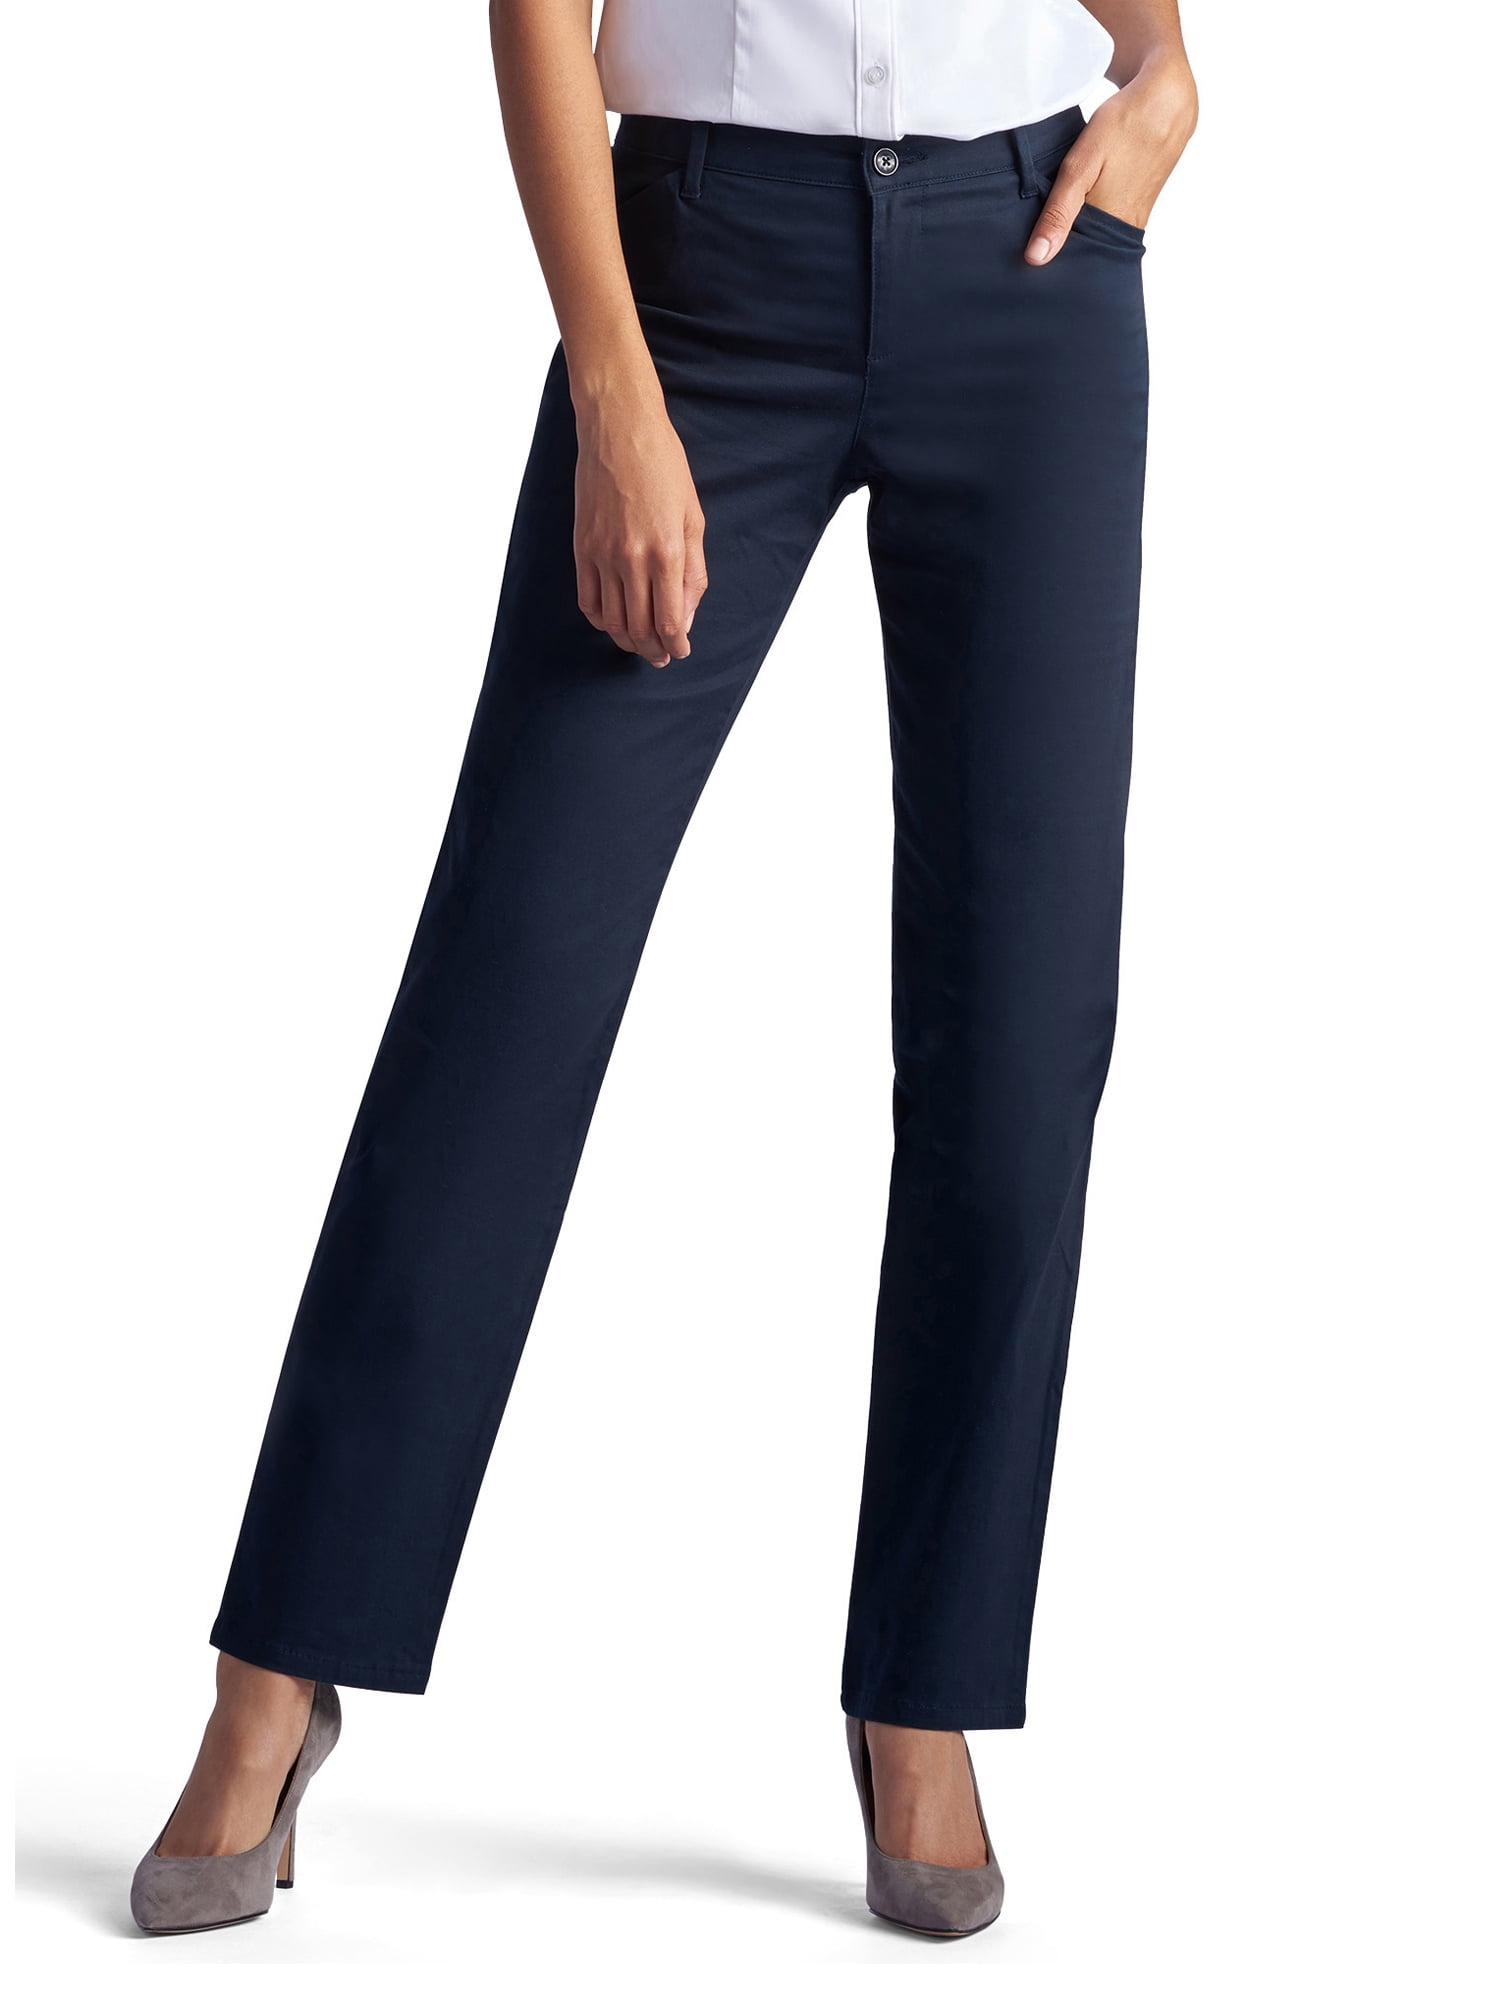 Lee Women's Relaxed Fit All Day Flat Front Straight Leg Pants Indigo Rinse